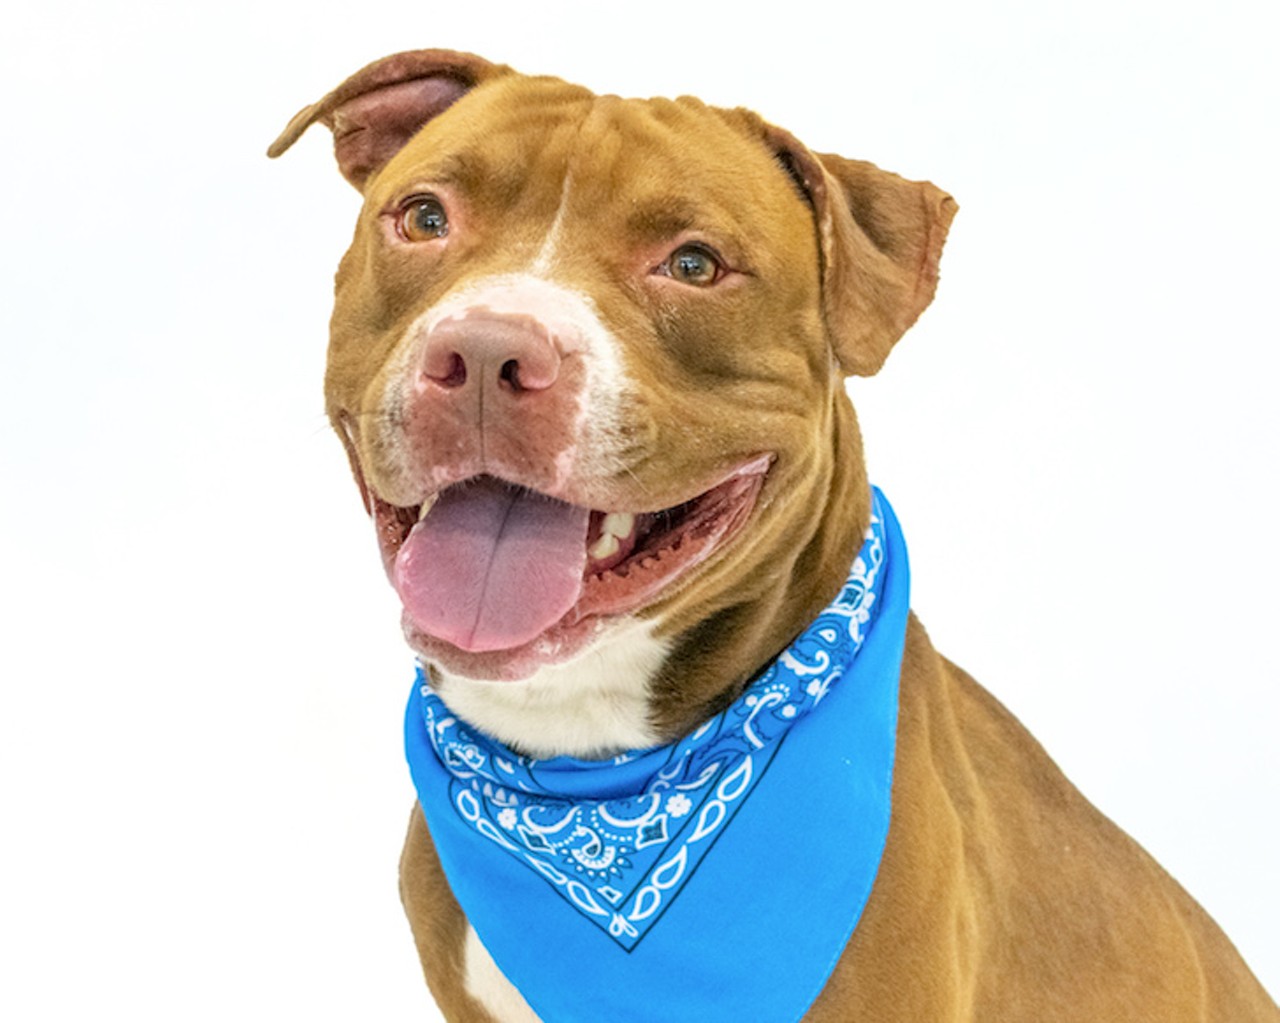 These excited, adoptable Orange County dogs are hoping you will stop by